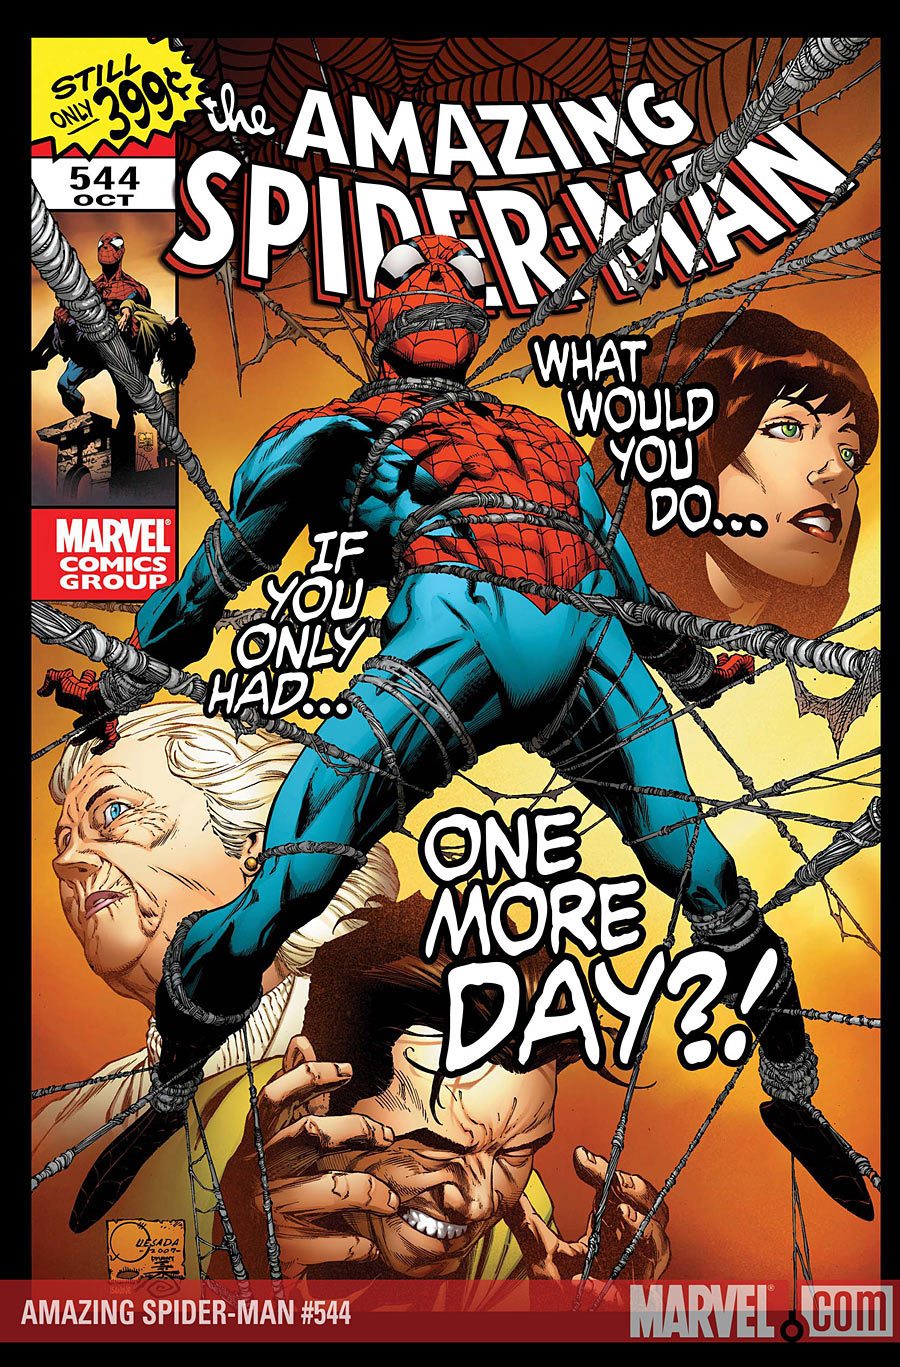 Tomorrow’s Spider-Man Comic Undoes One Of Marvel’s Stupidest Mistakes